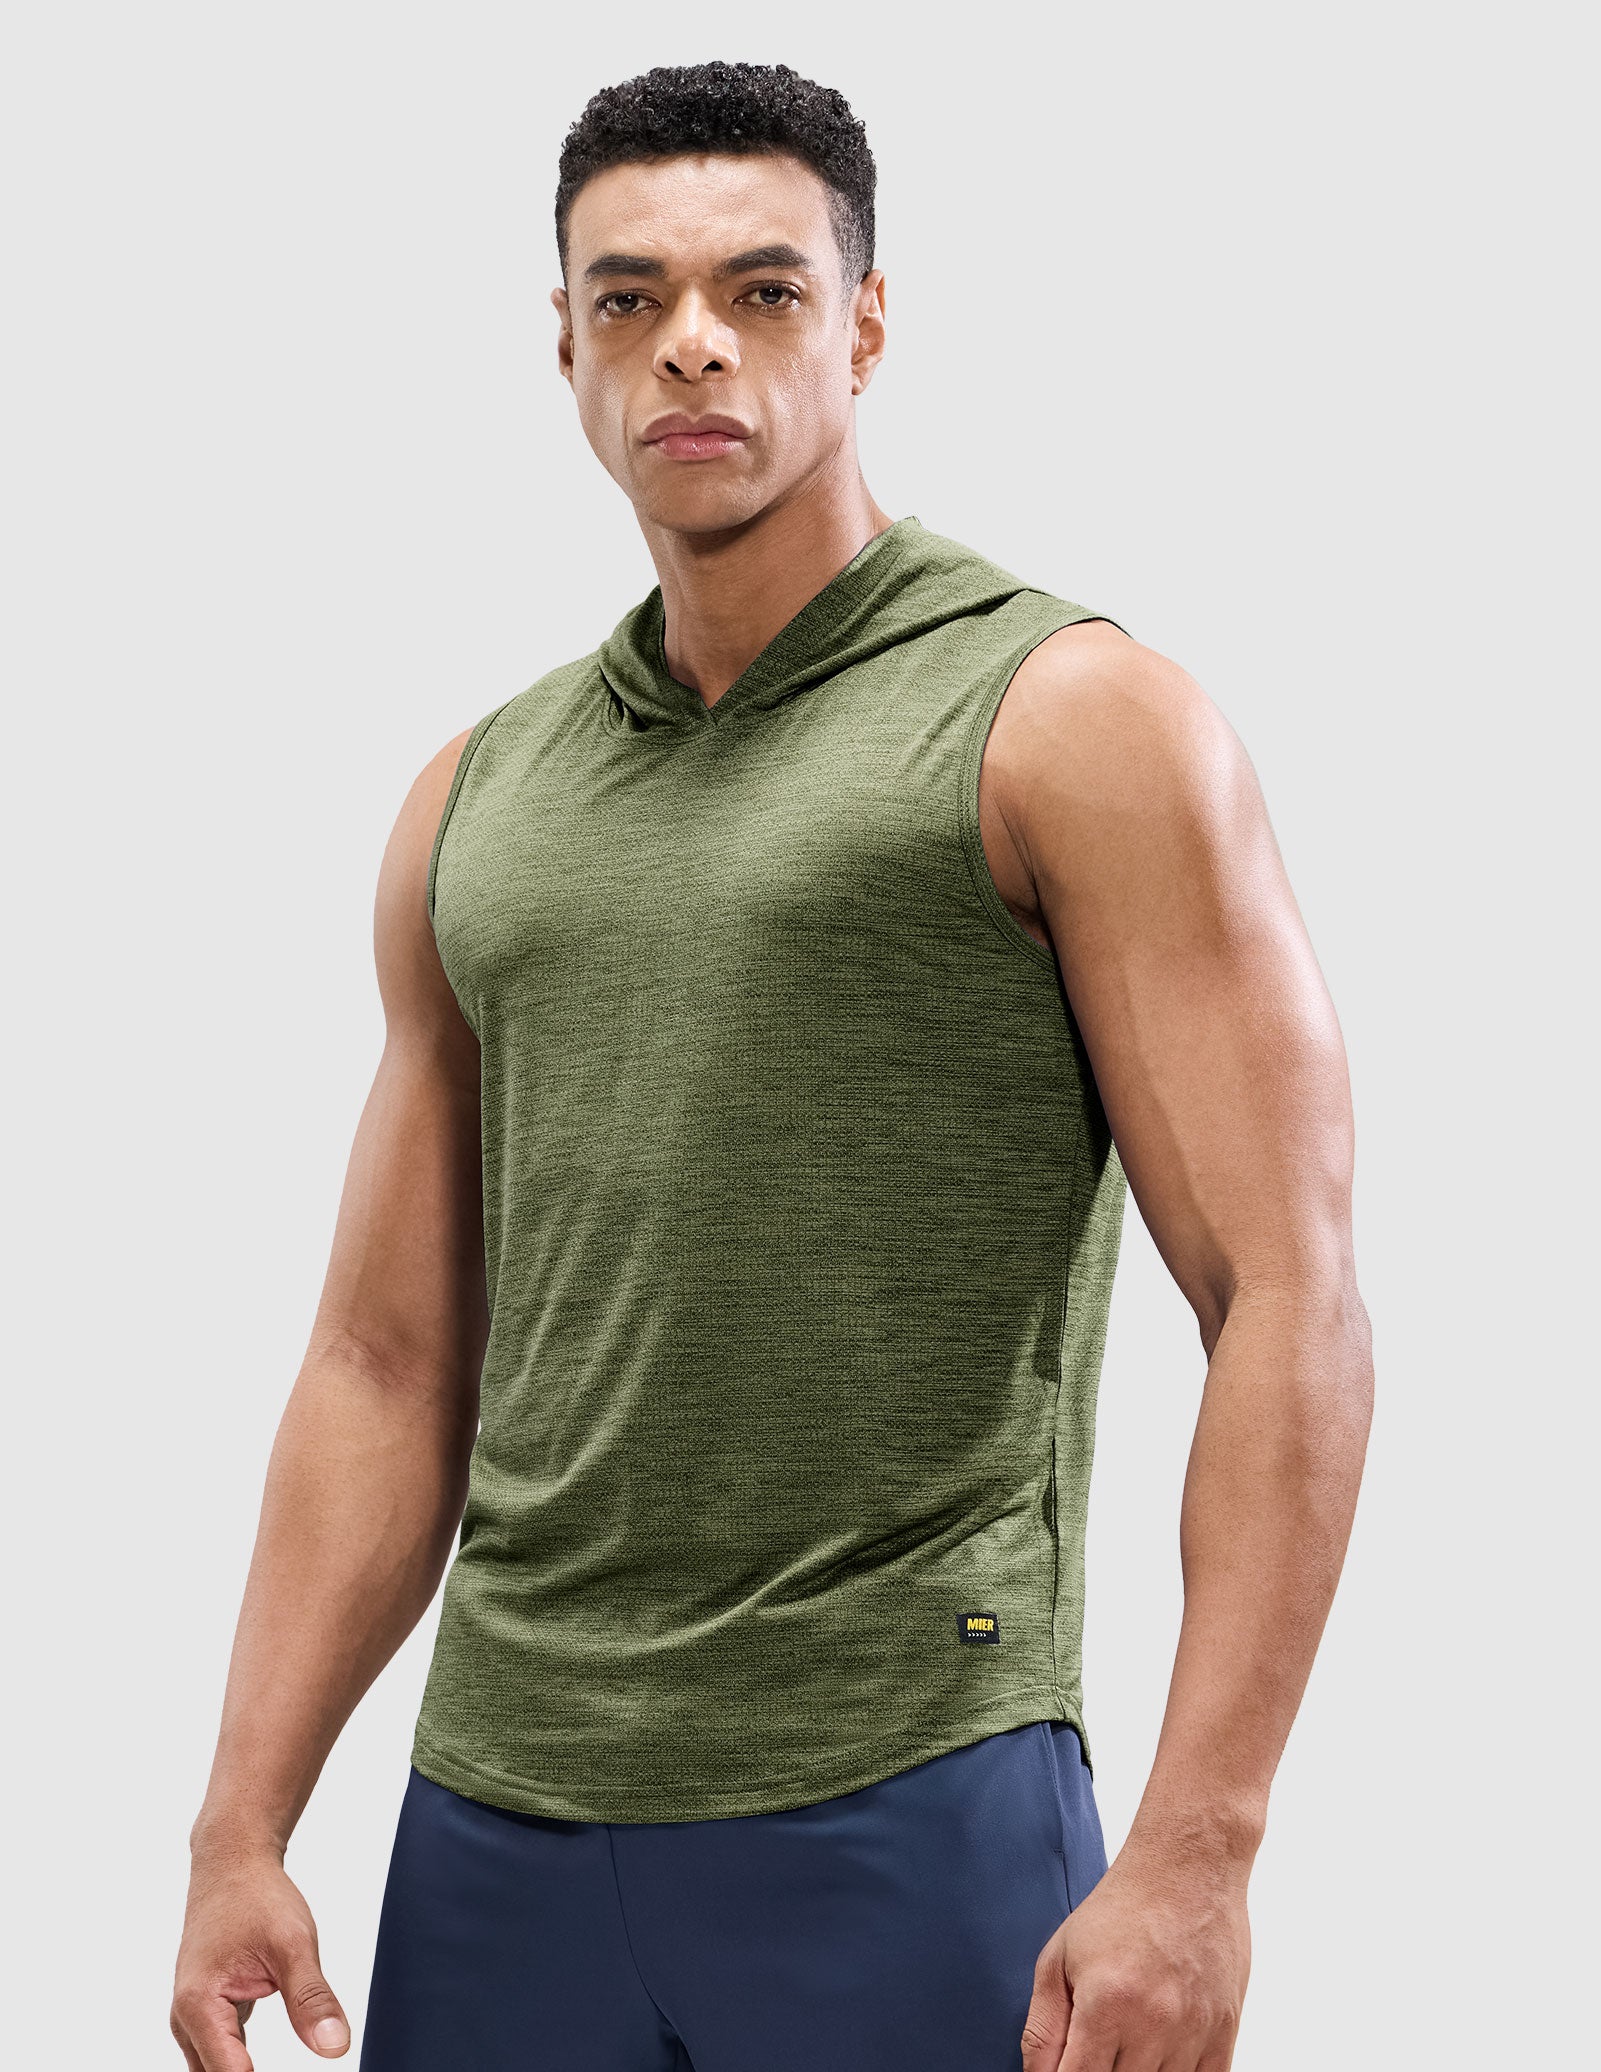 Men's Sleeveless Tank Top with Hood Quick Dry Shirts